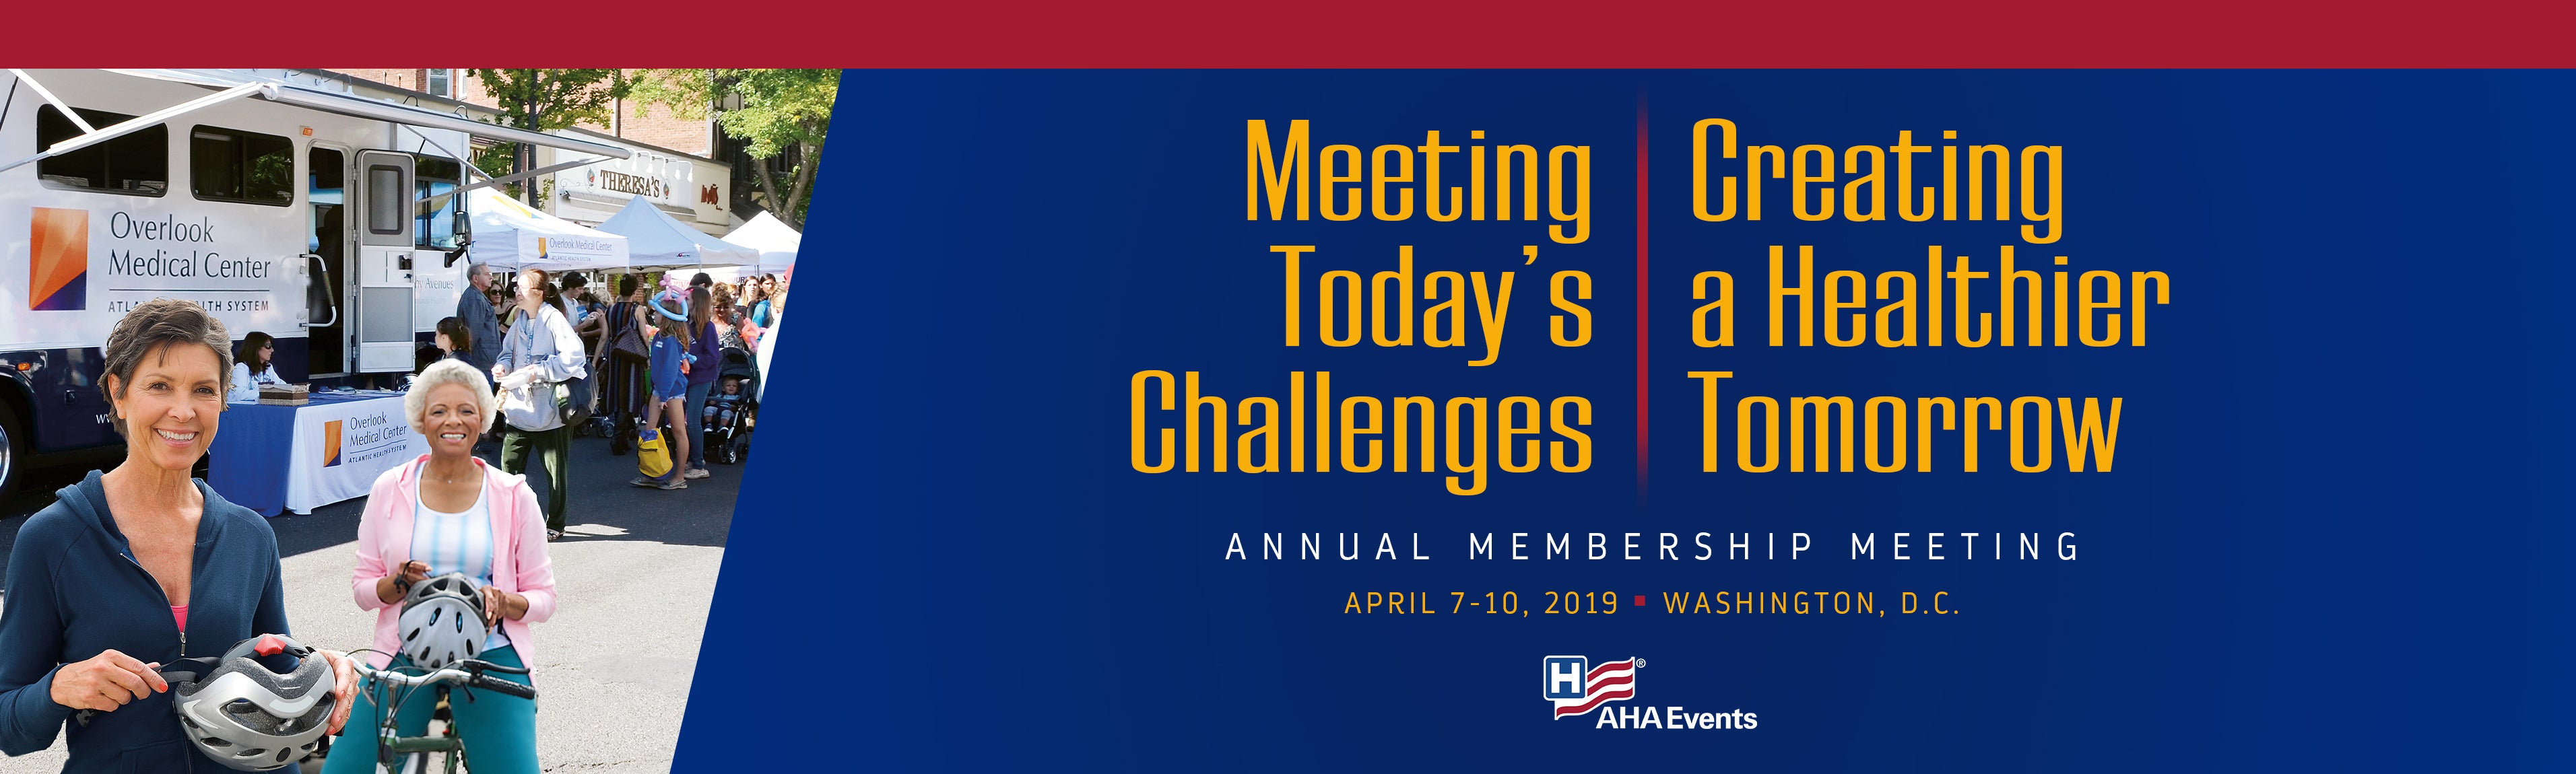 2019 Annual Meeting Schedule of Events | AHA3825 x 1150